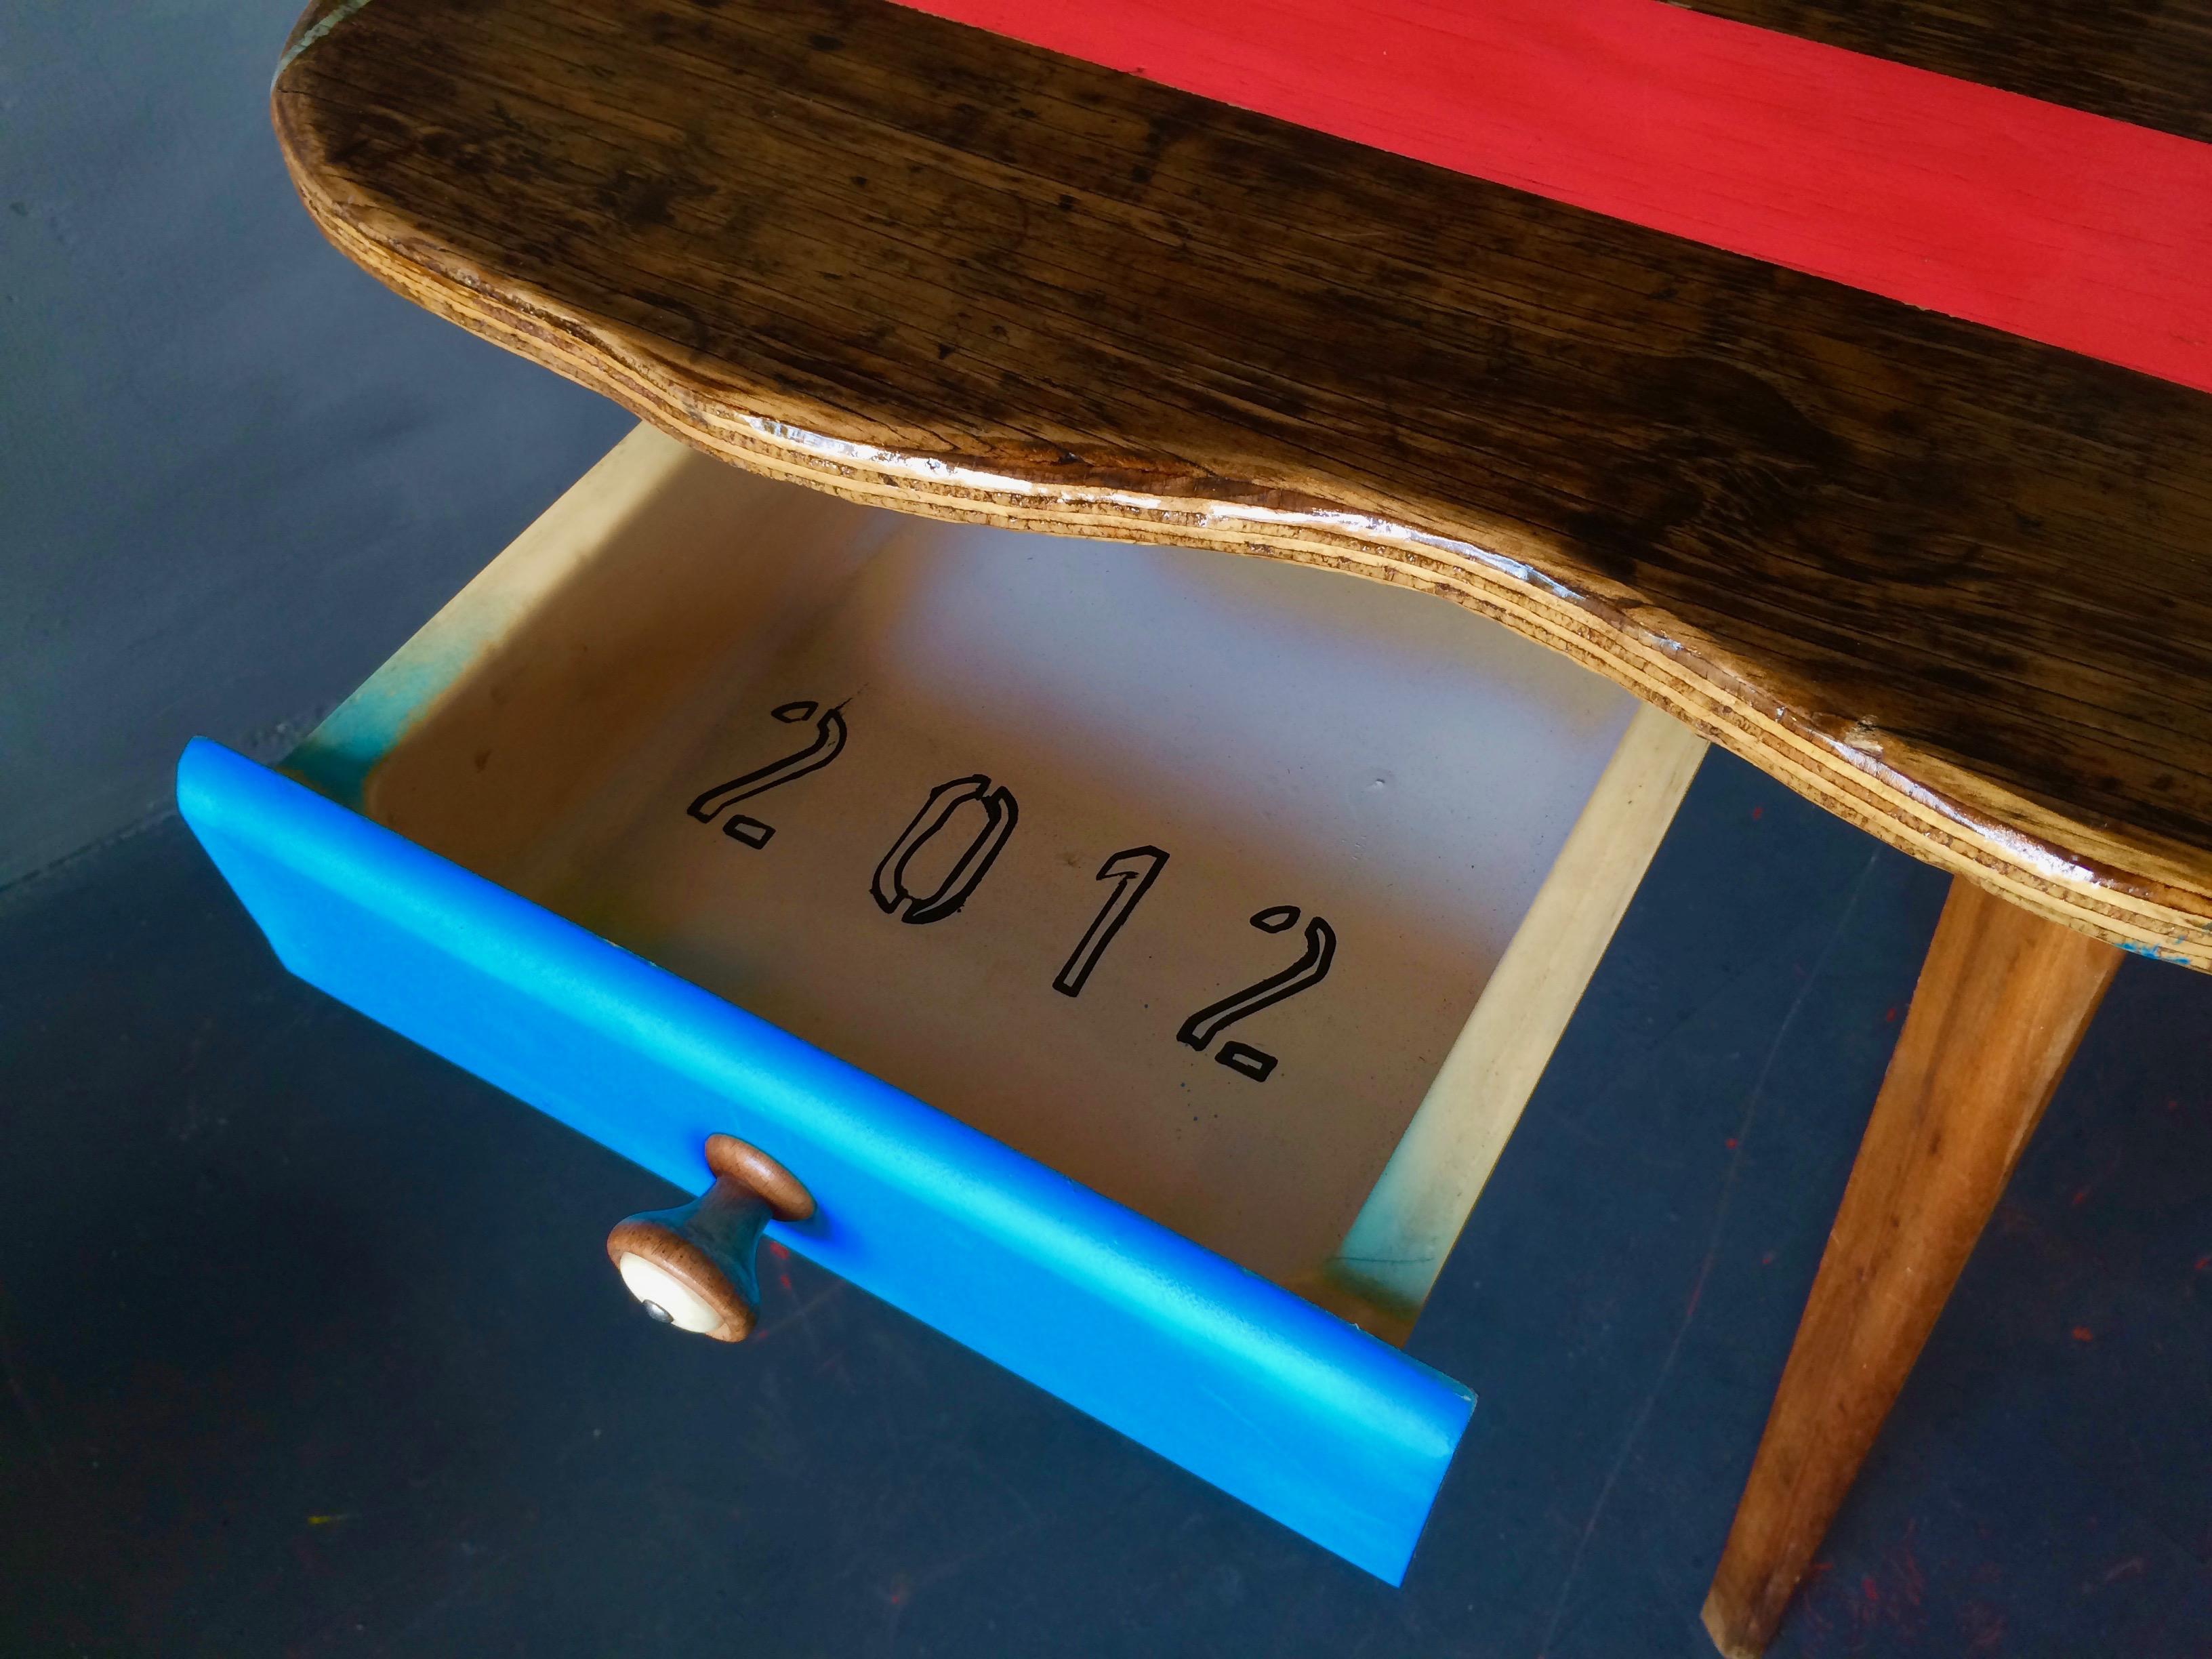 1950s kitchen table frame with drawer, tabletop used plywood, painted and multi lacquered. In the style of Piet Hein Eek and Palla this unusual small table is perfect as a kitchen table for four chairs or as a work table for you and your